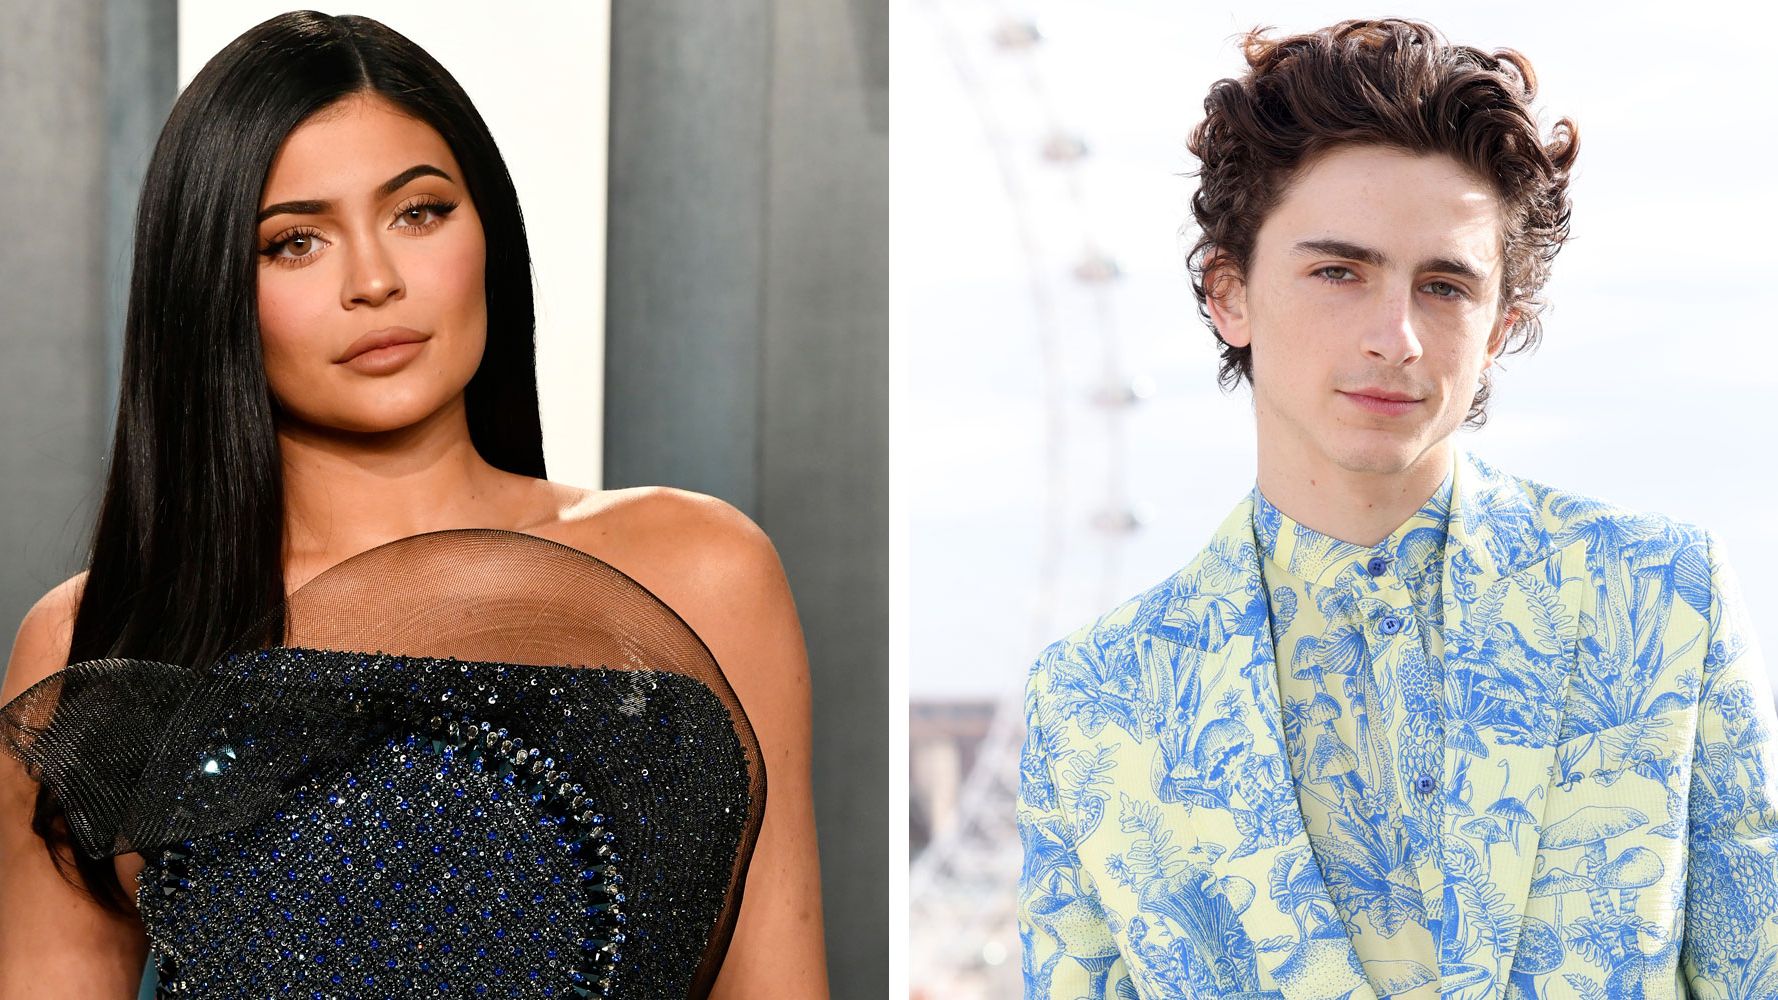 Kylie Jenner and Timothee Chalamet dating rumors fly